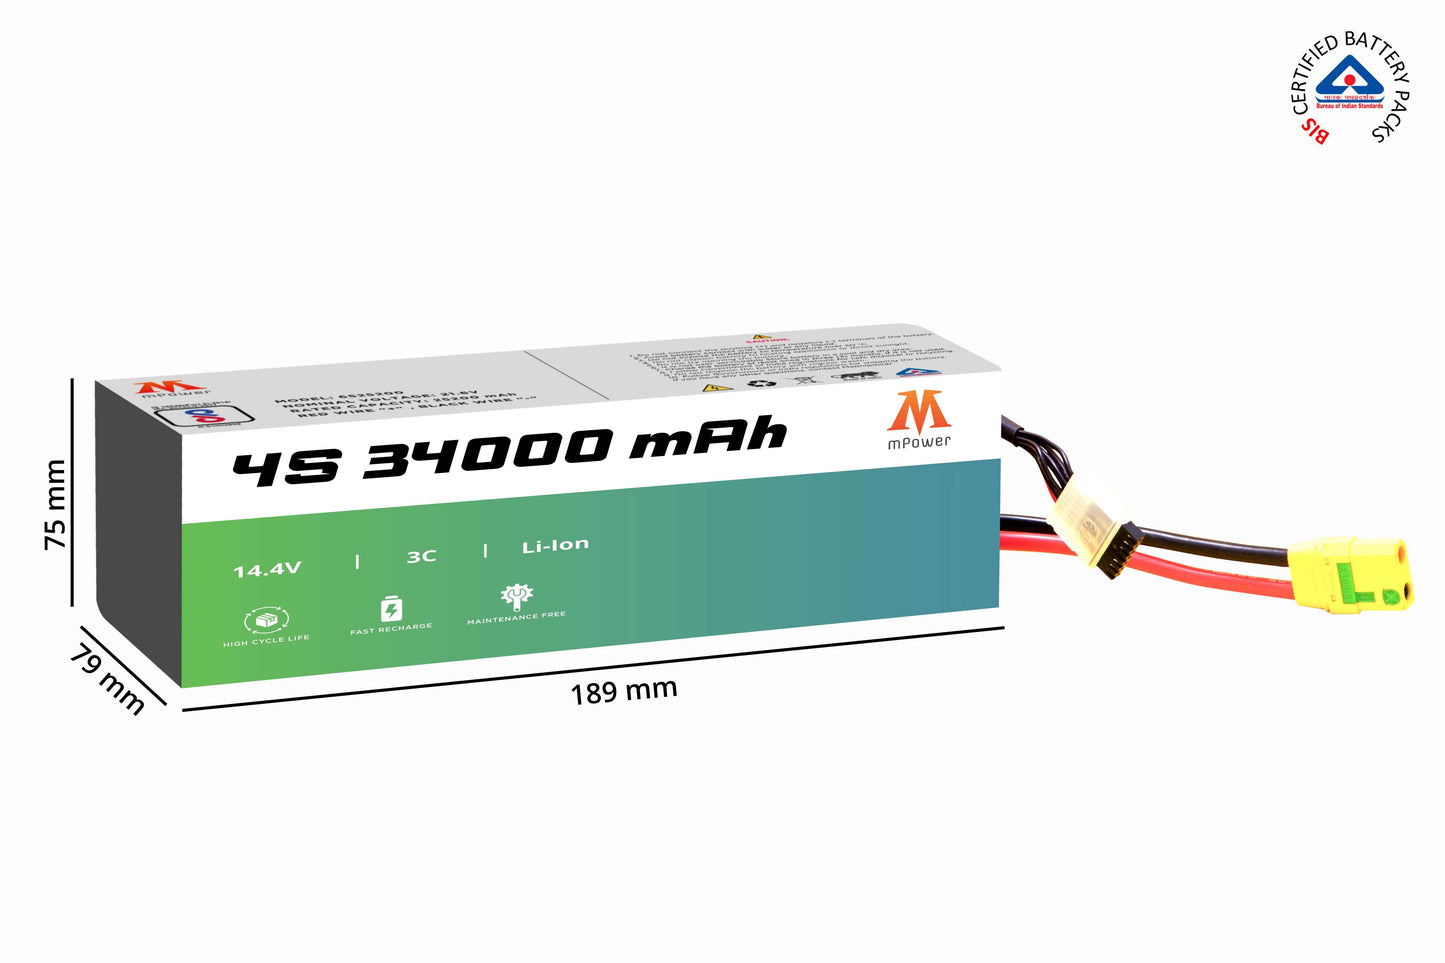 mPower 4S 34000mAh Lithium-Ion Battery for Surveillance Drones